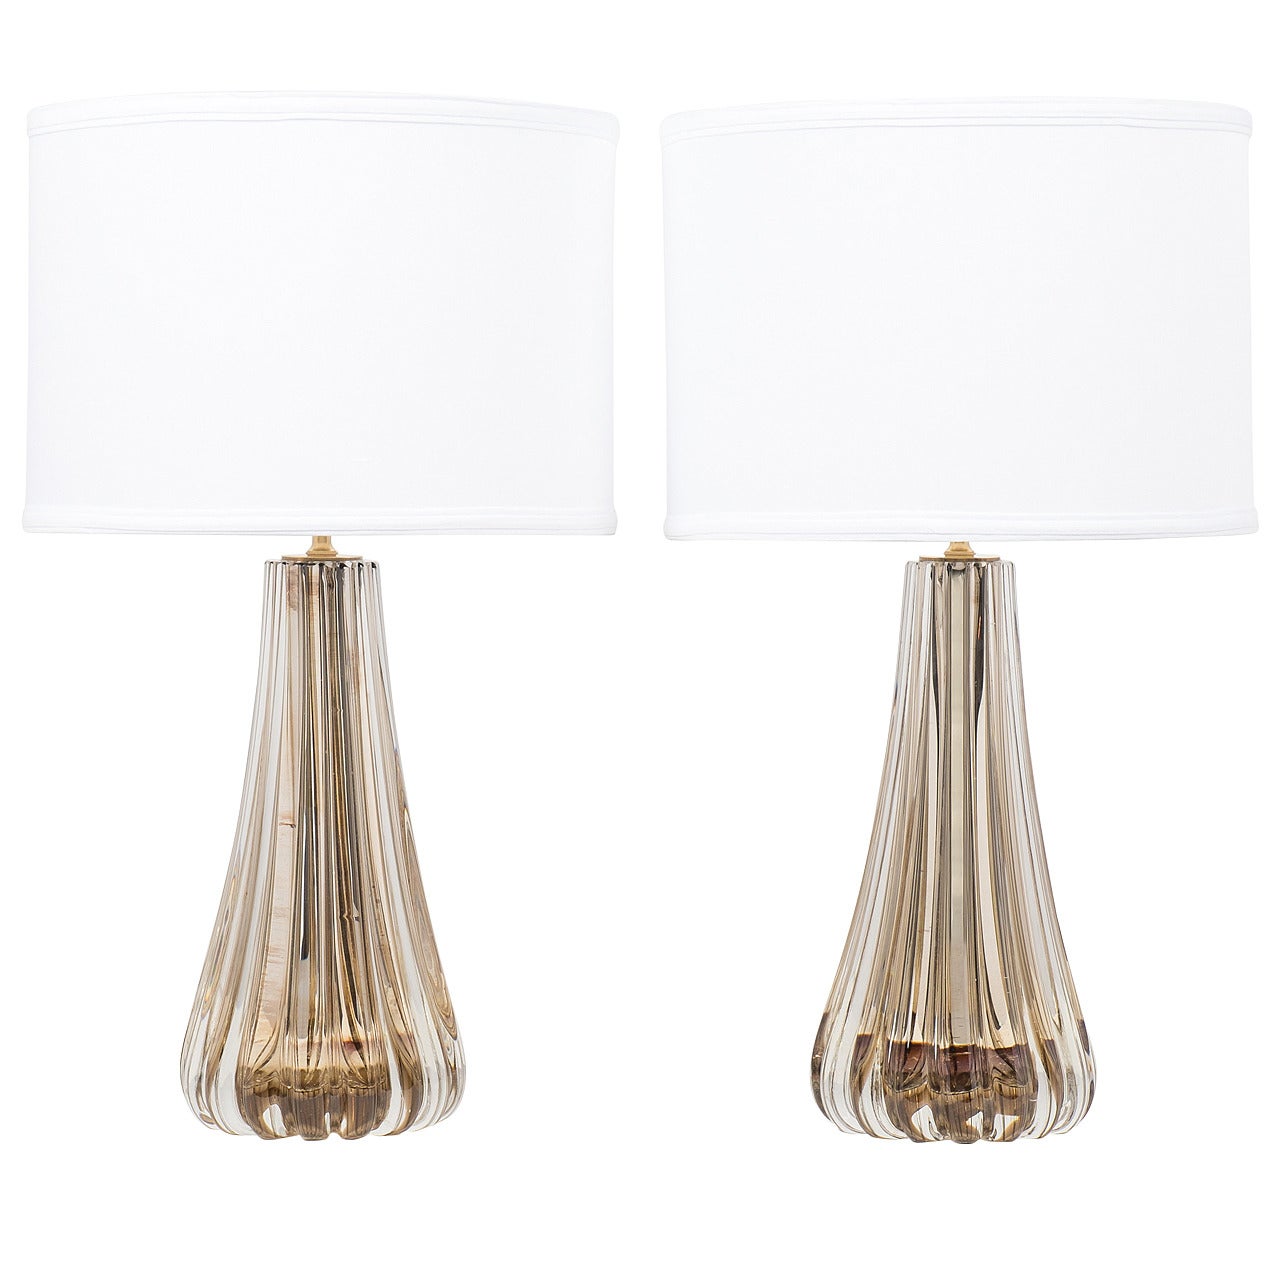 Pair of Murano Mercury Glass Lamps For Sale